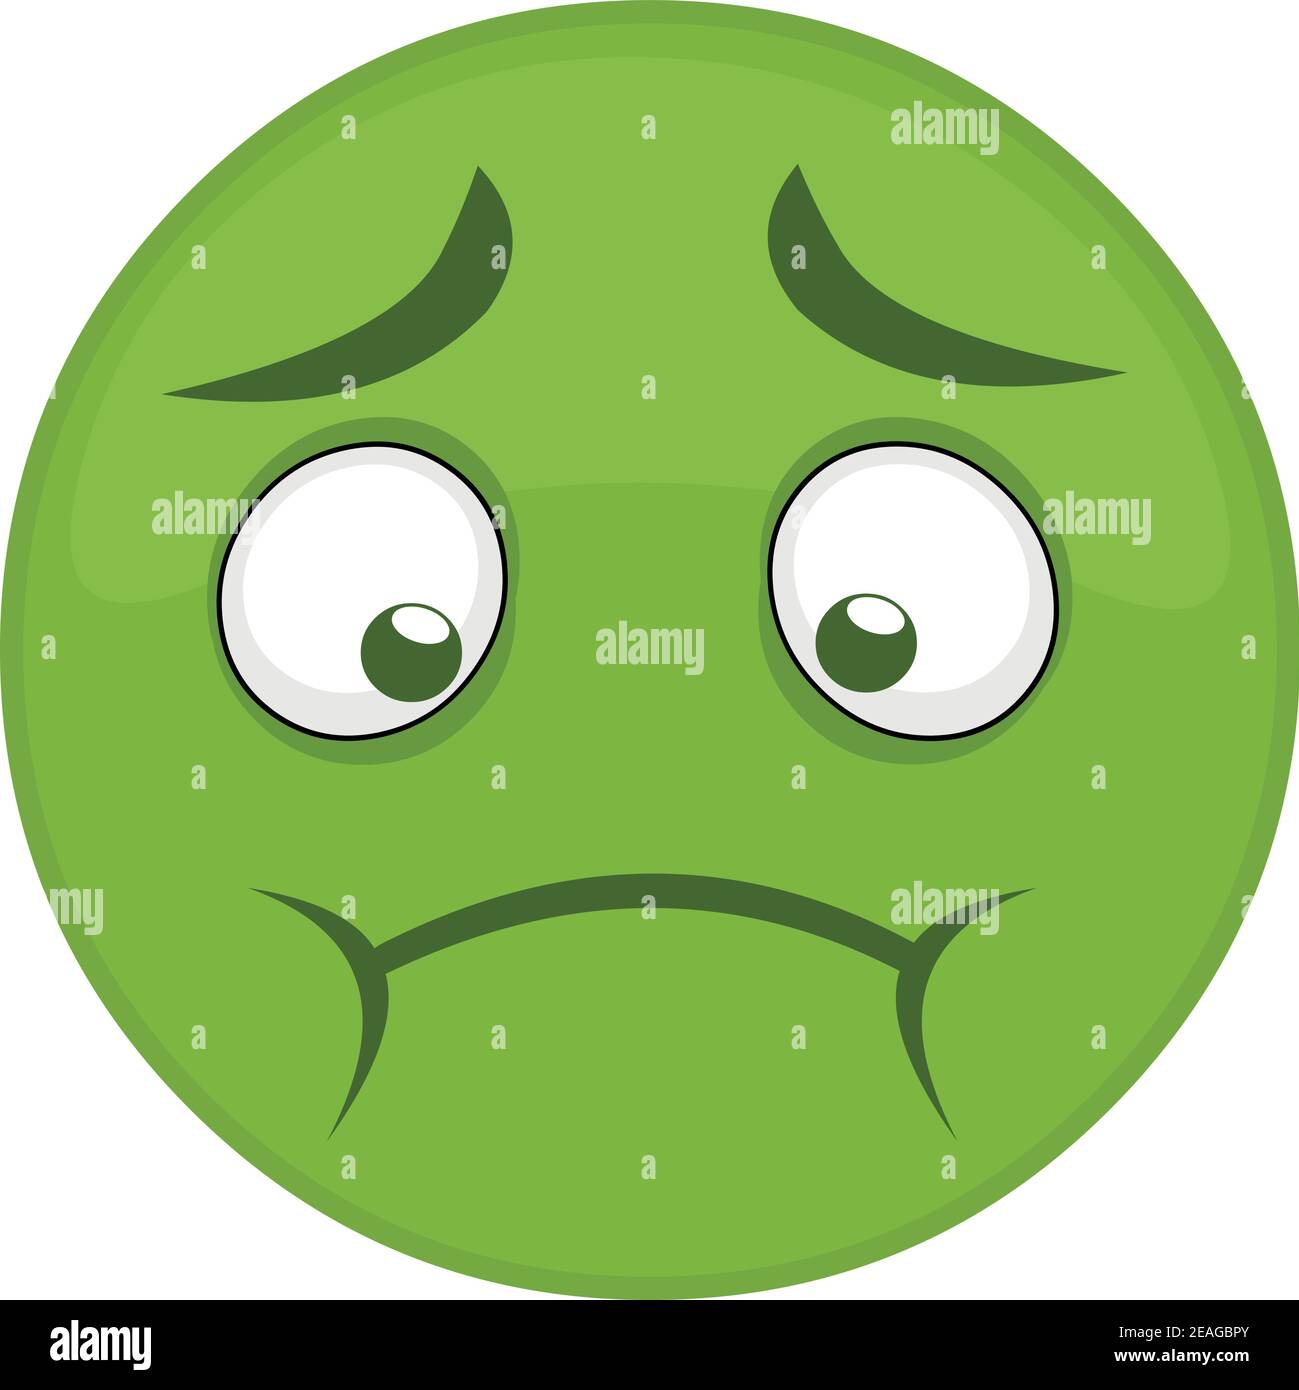 Vector illustration of an emoticon with a green face, with a dizzy and decomposed expression Stock Vector